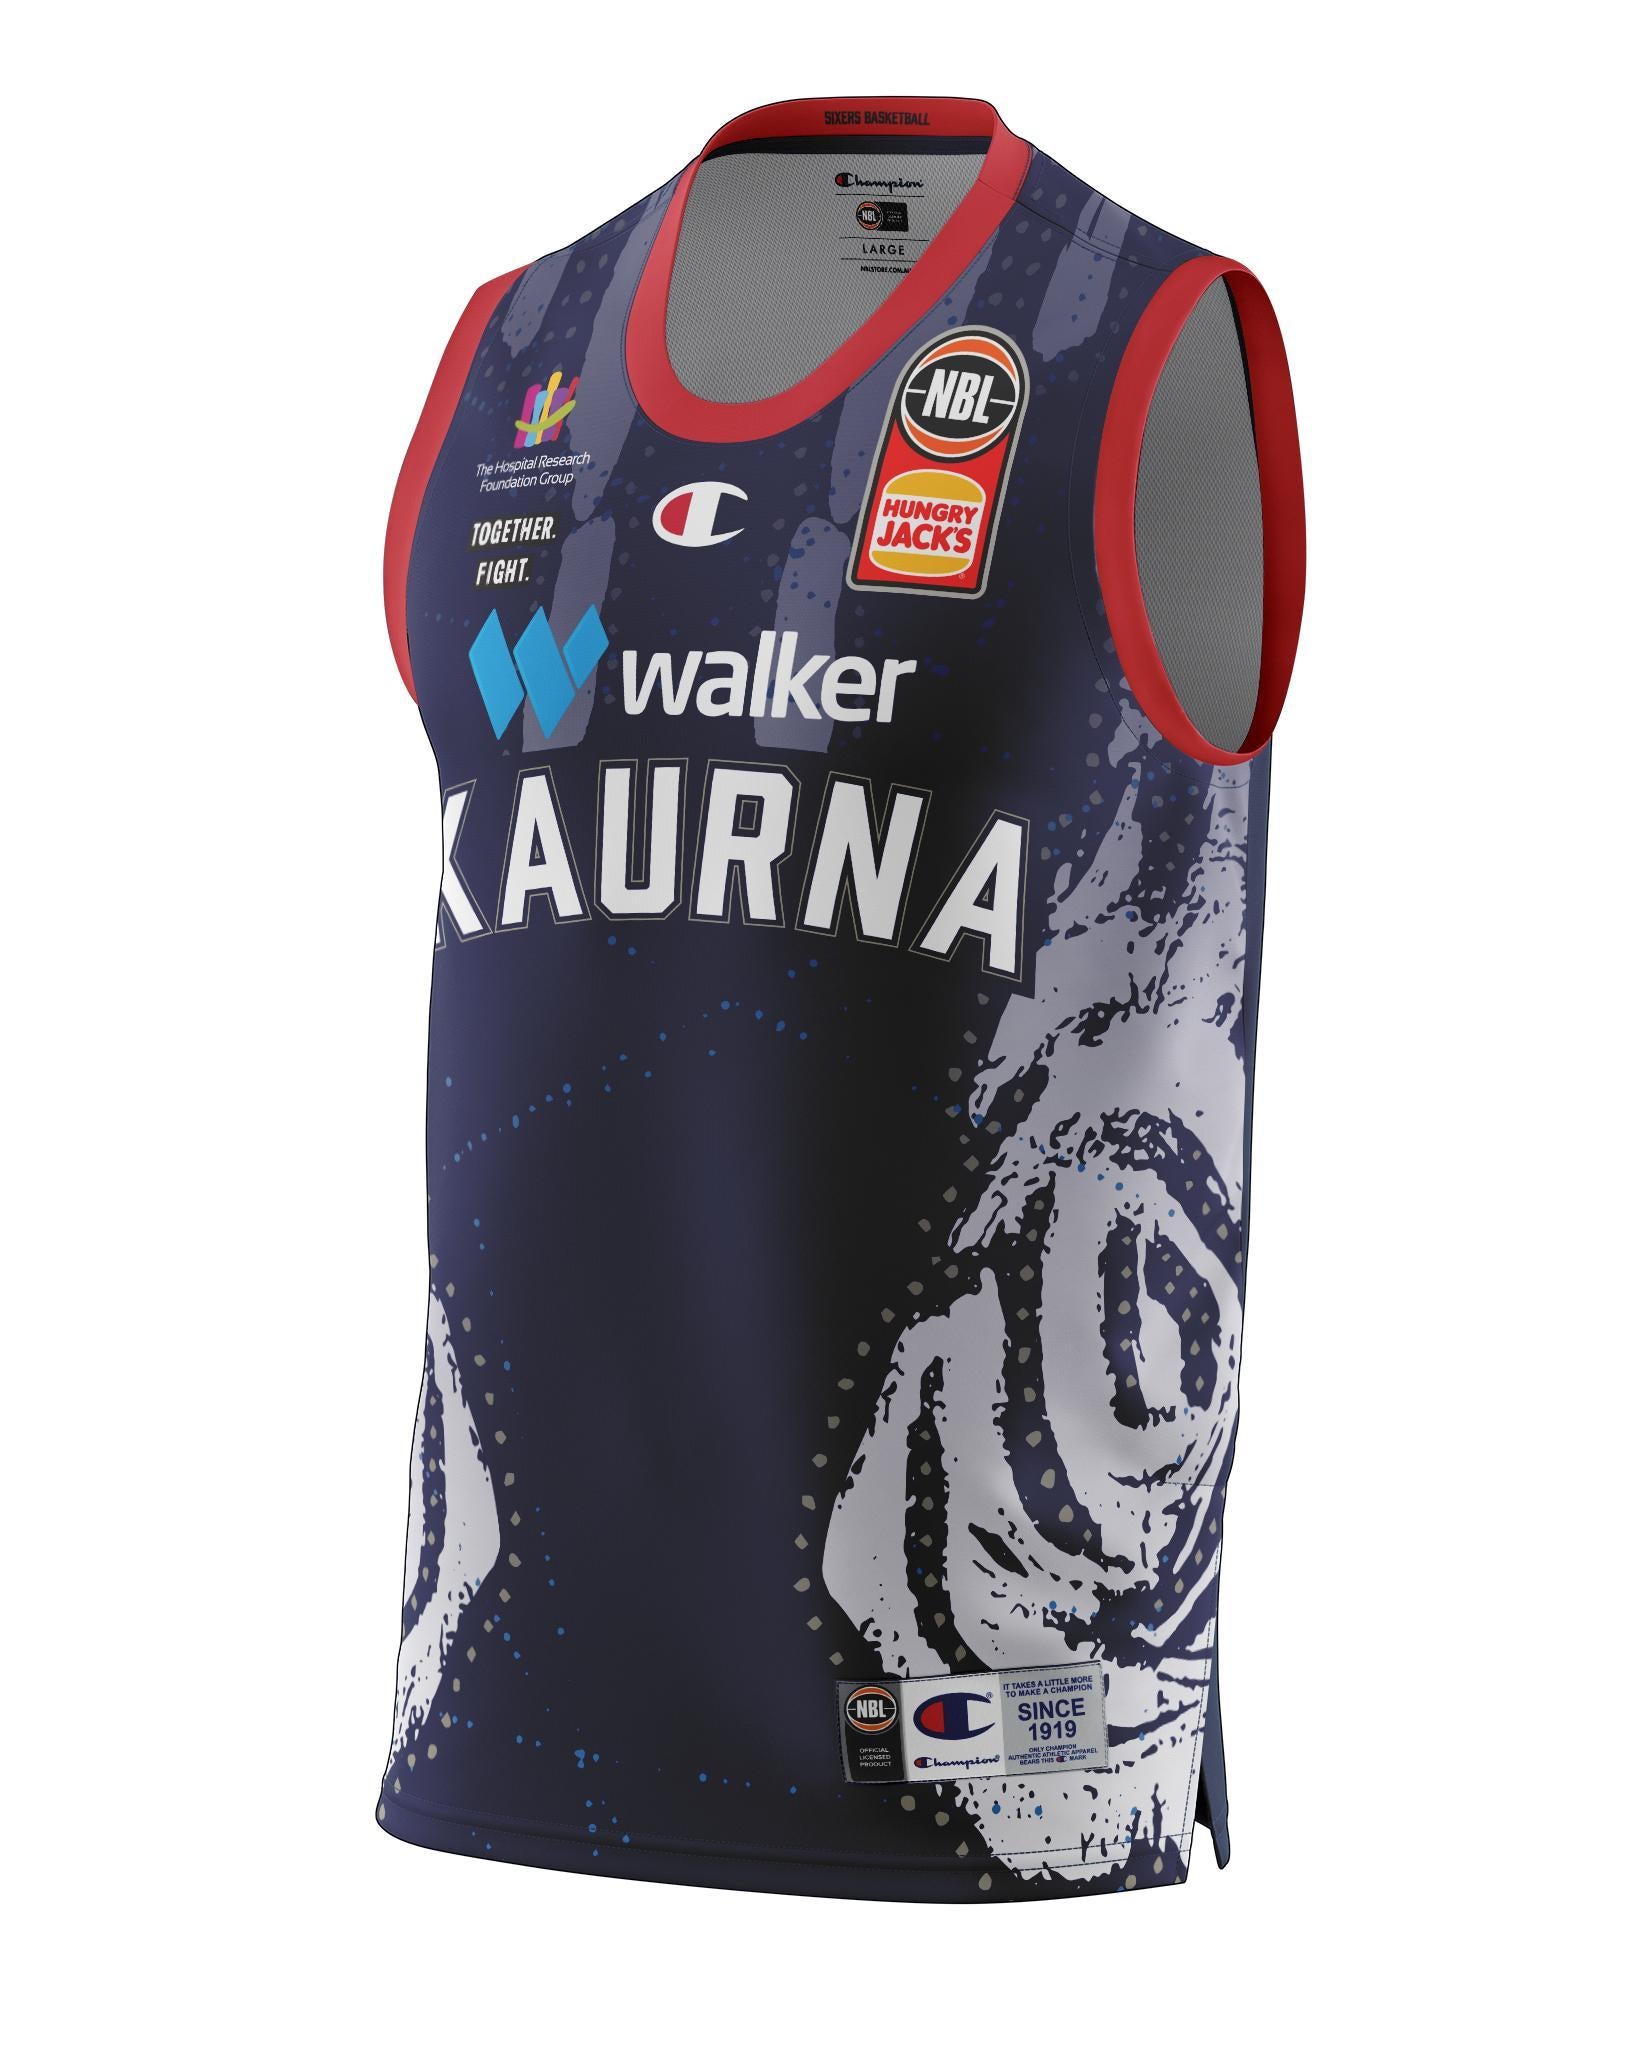 Adelaide 36ers 2021/22 Authentic Adult Indigenous Jersey - Adelaide 36ers